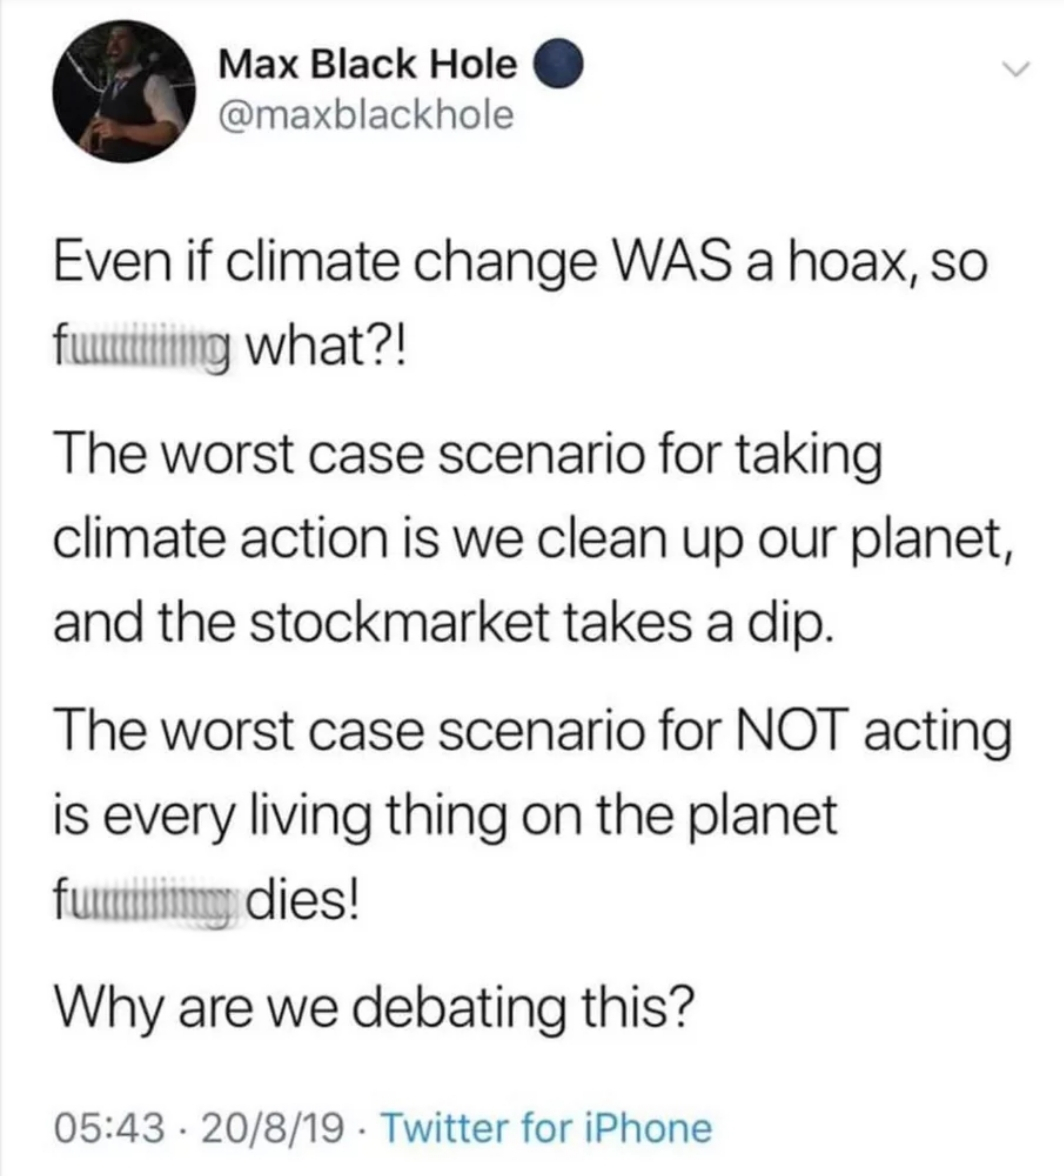 ex wife islam quotes - Max Black Hole Even if climate change Was a hoax, so fumating what?! The worst case scenario for taking climate action is we clean up our planet, and the stockmarket takes a dip. The worst case scenario for Not acting is every livin